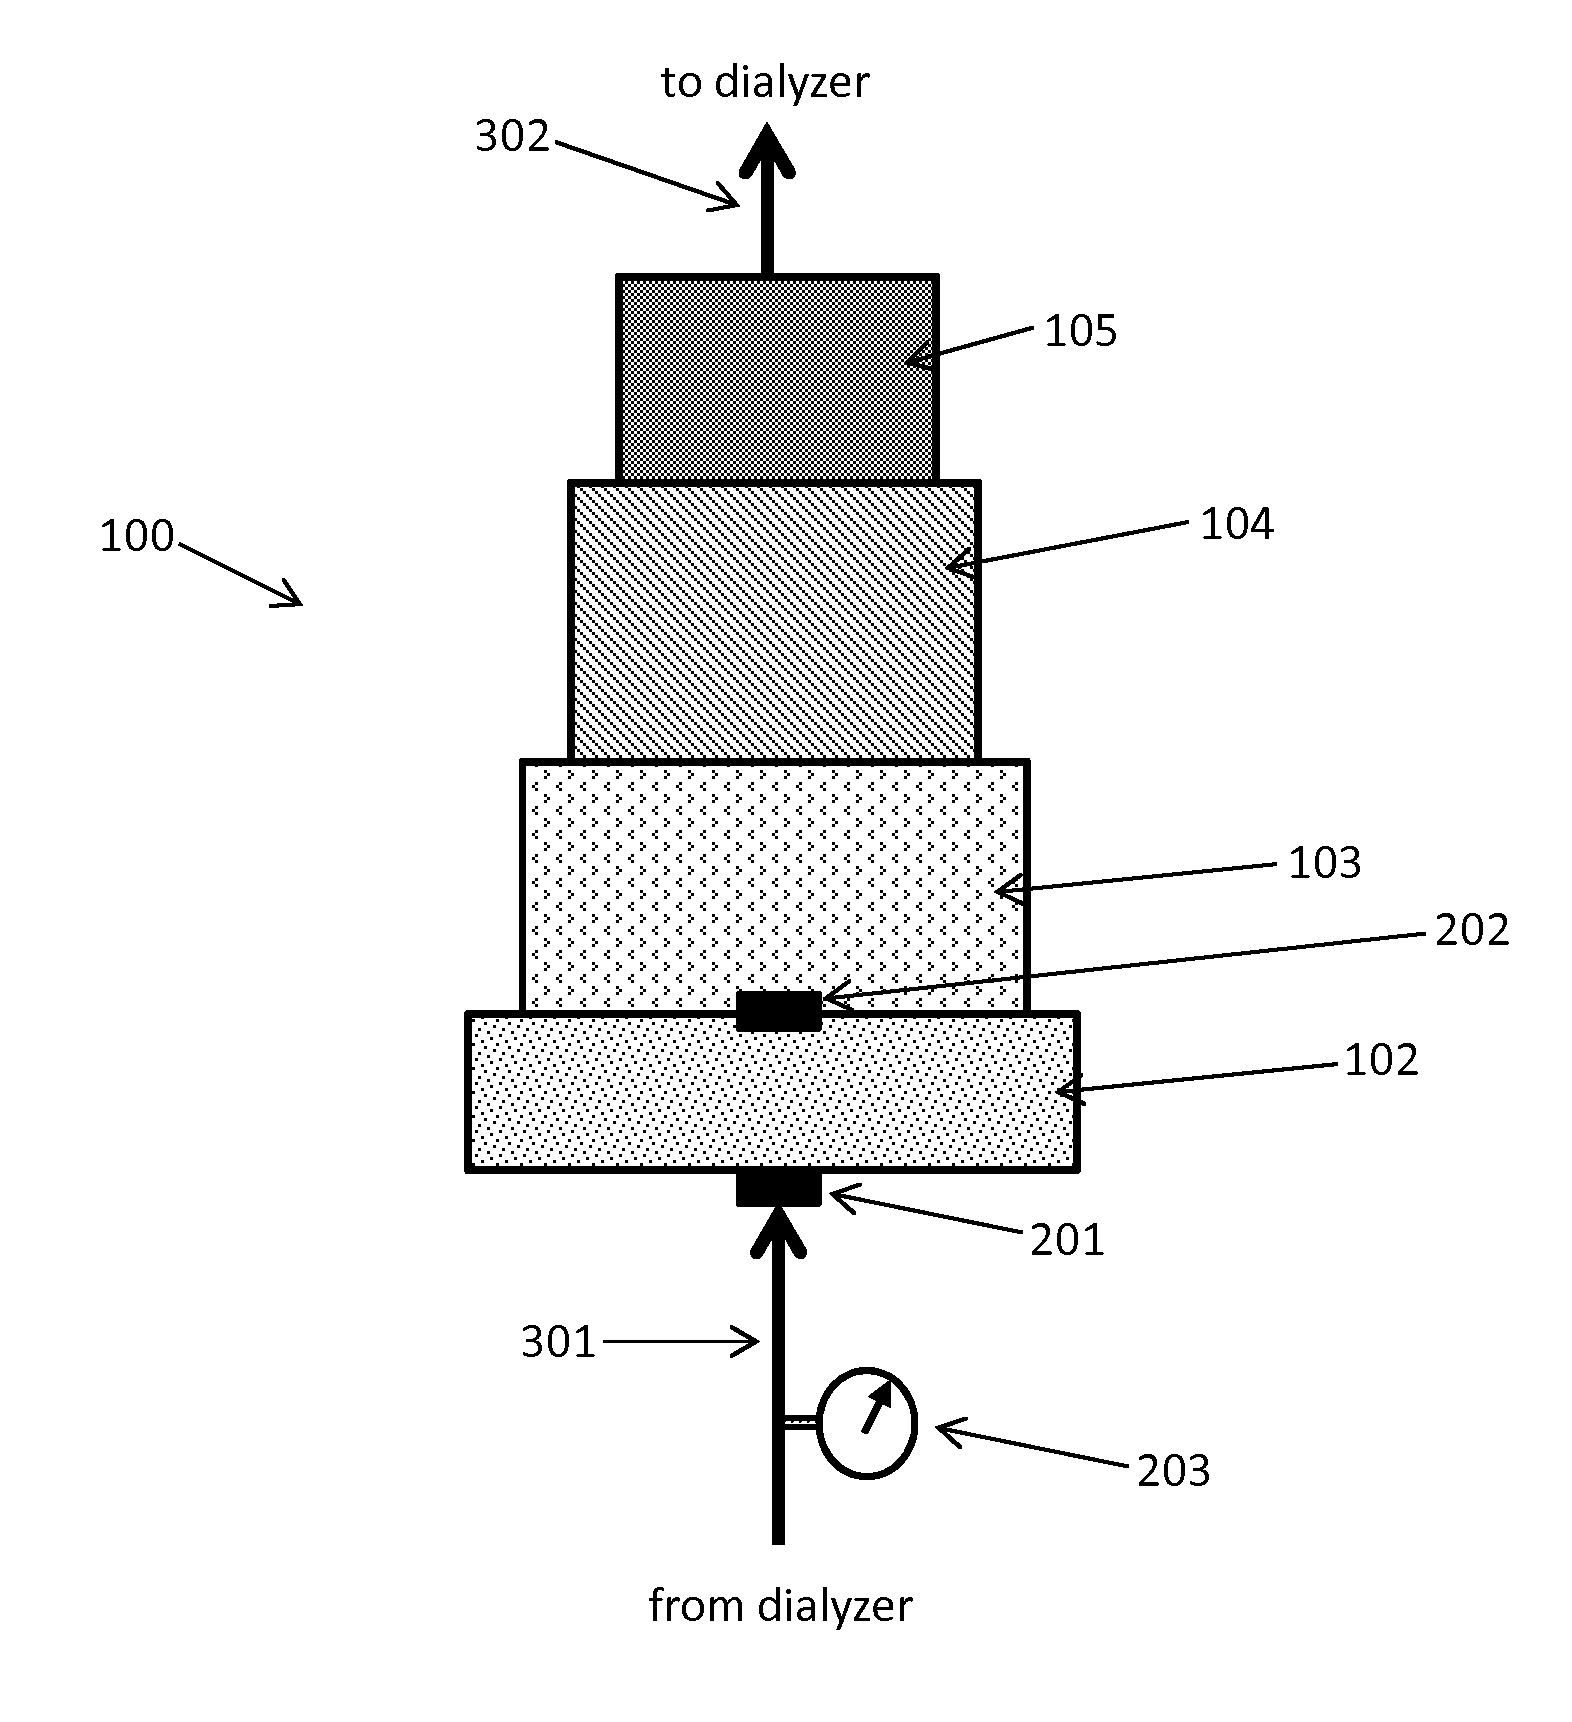 Fluid circuits for sorbent cartridge with sensors